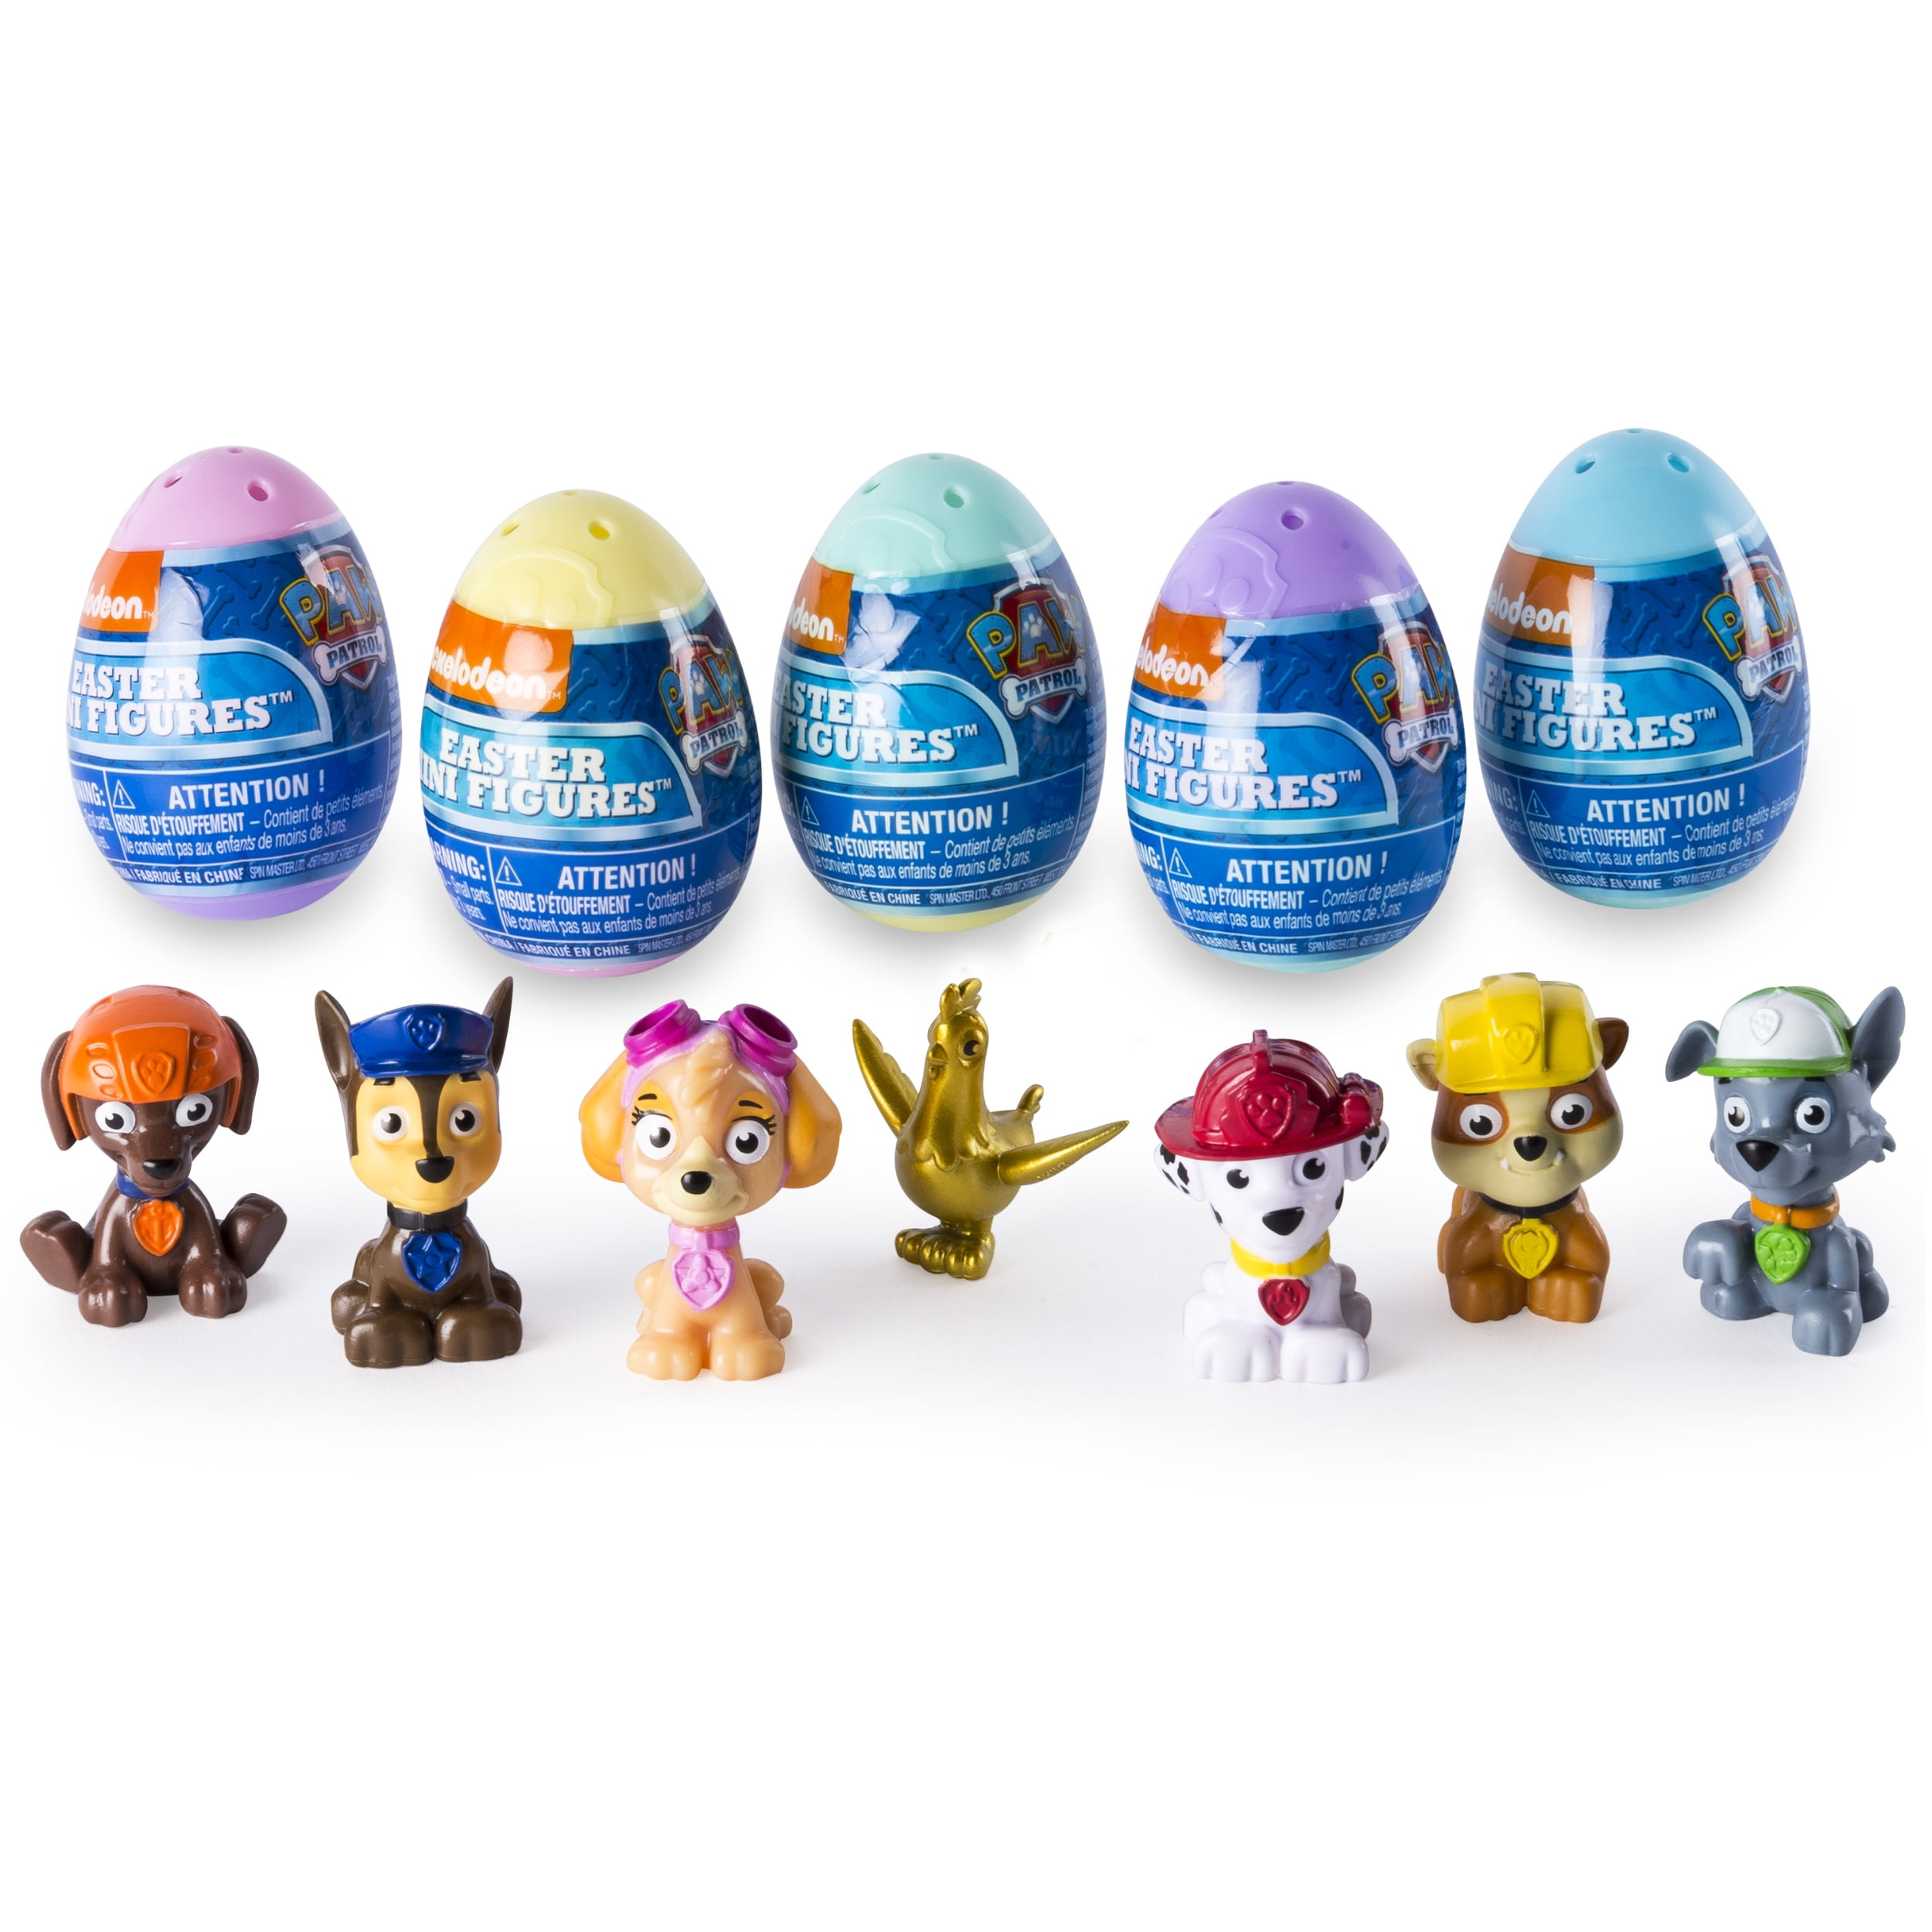 Paw Patrol - Easter Mini Figures Blind Pack (colors and styles vary) - Walmart.com